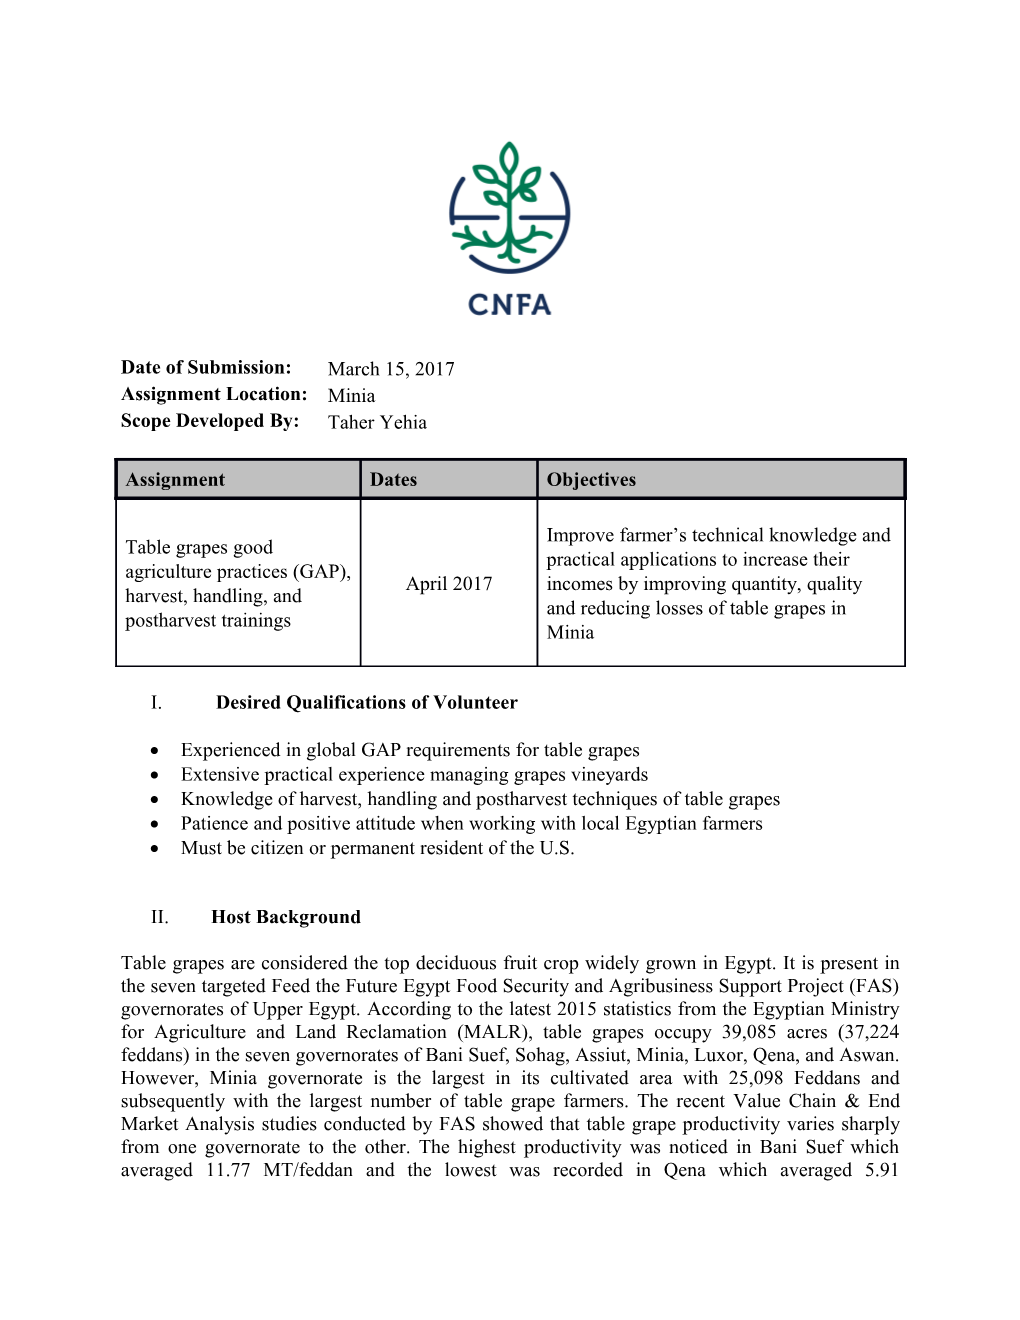 Experienced in Global GAP Requirements for Table Grapes